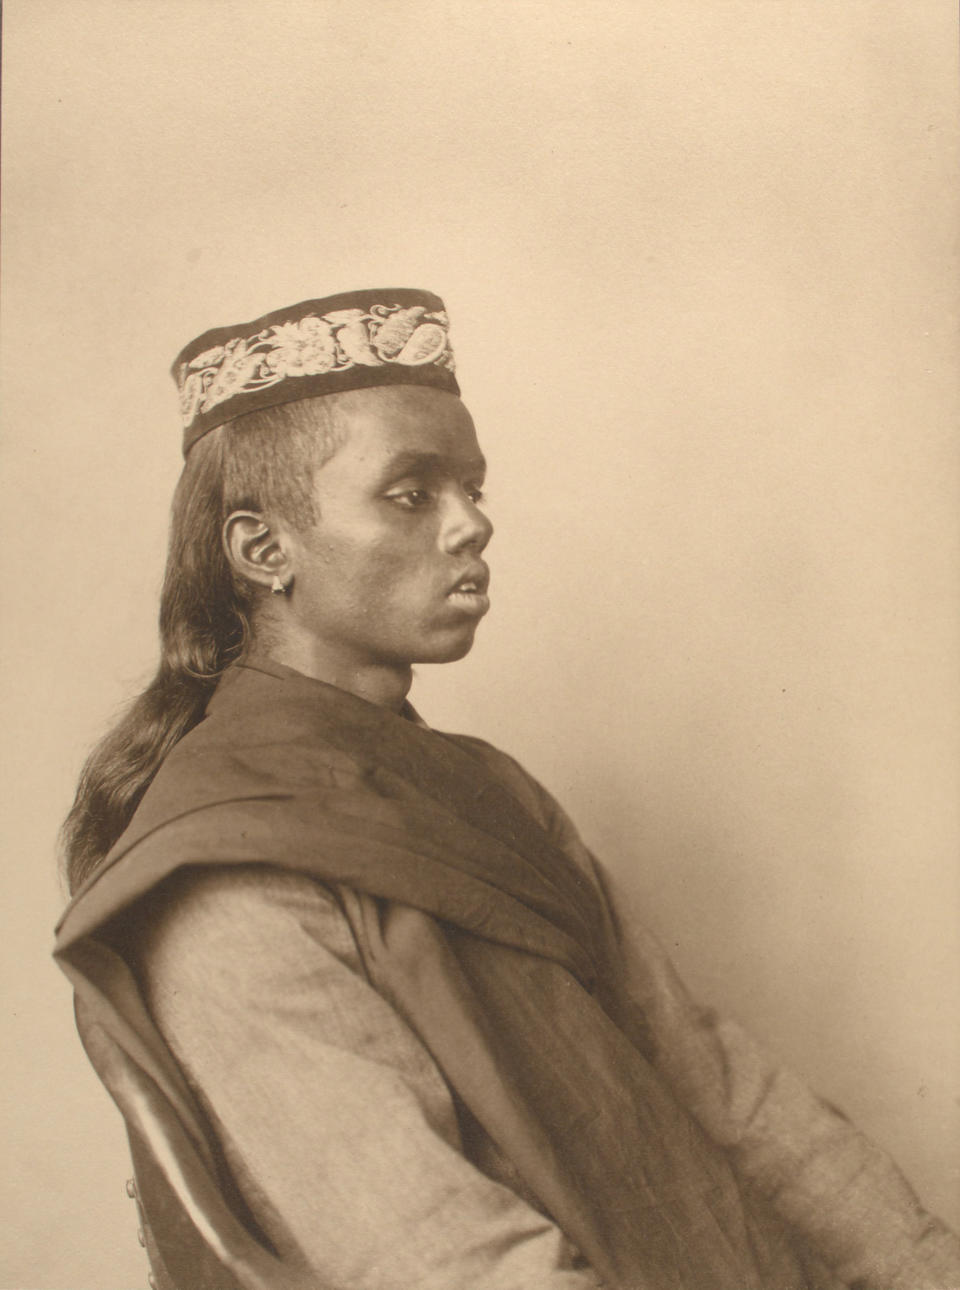 <p>Hindoo boy, 1911. (Photograph by Augustus Sherman/New York Public Library) </p>